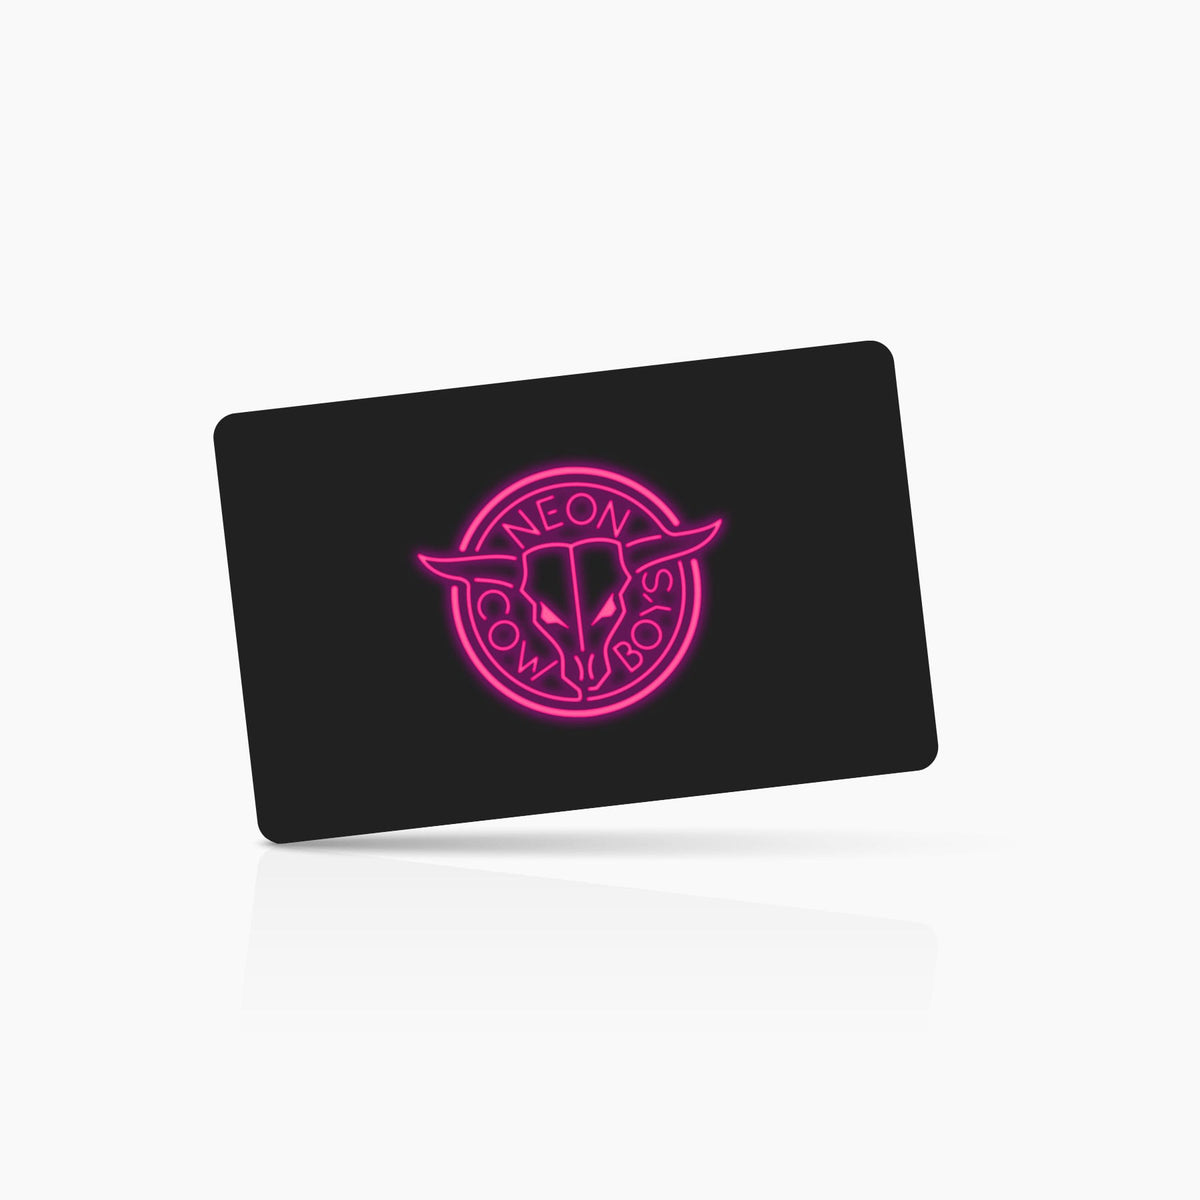 Discounted Black Friday Gift Card